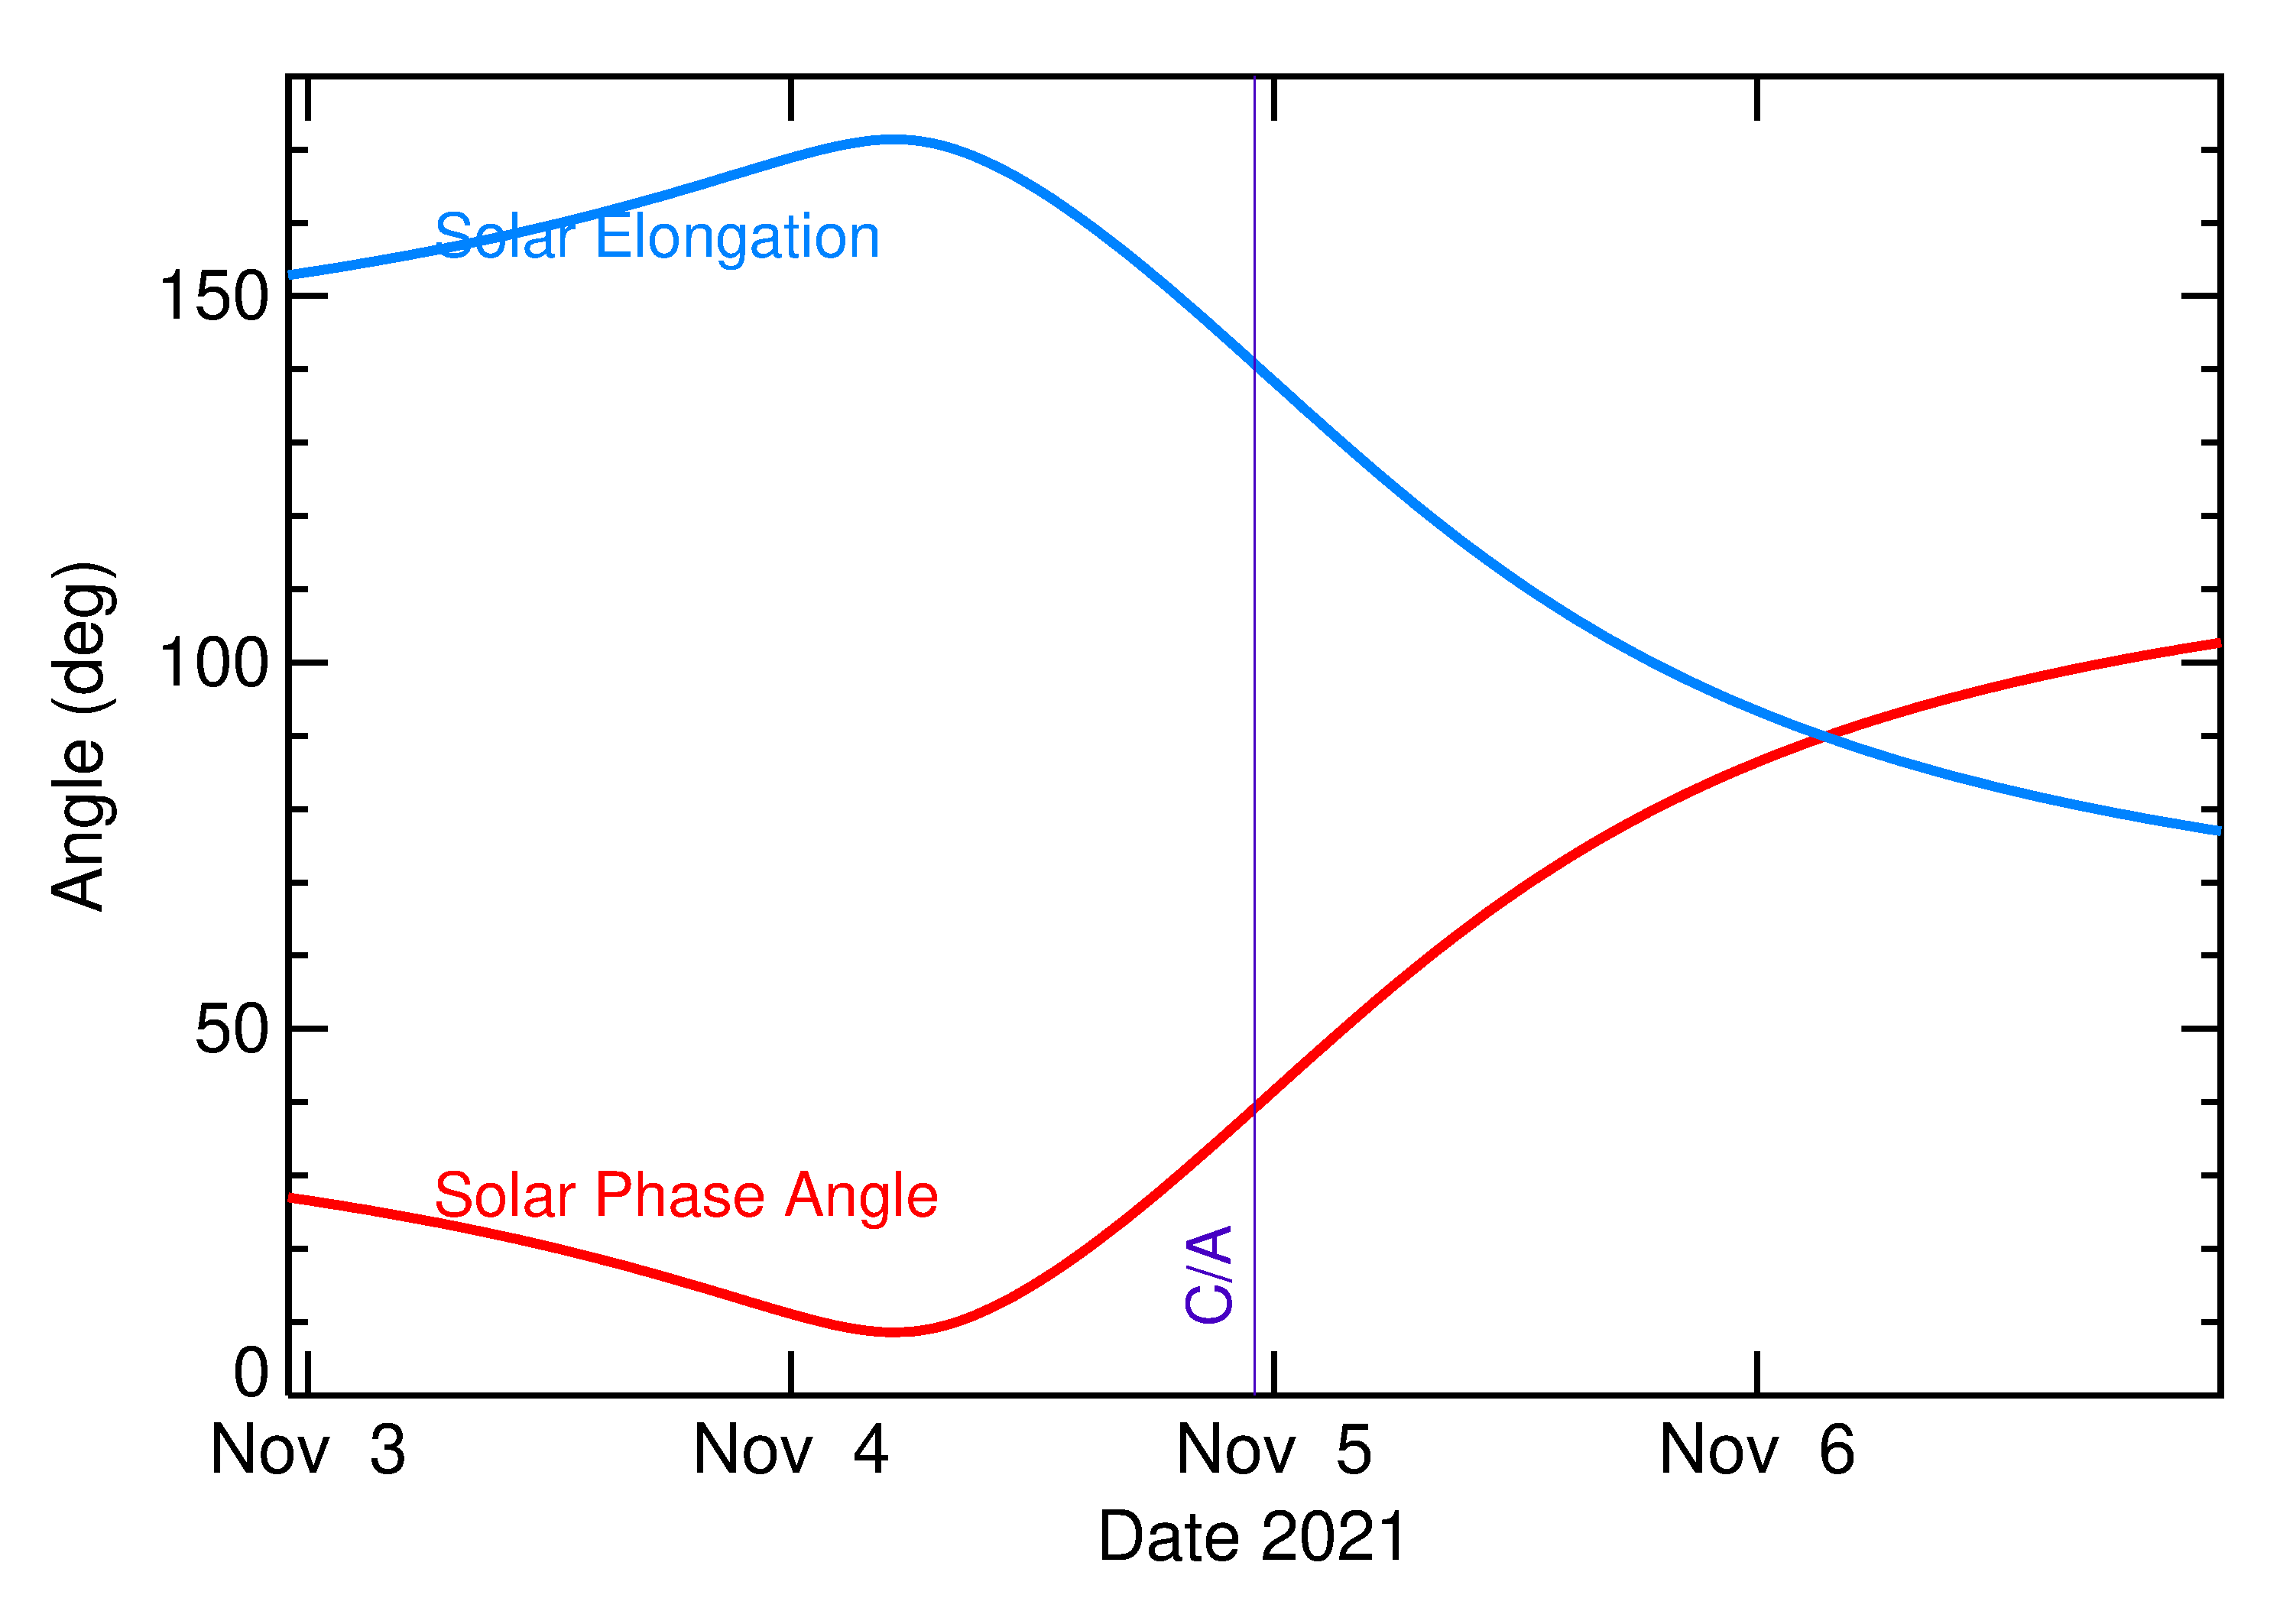 Solar Elongation and Solar Phase Angle of 2021 UO7 in the days around closest approach